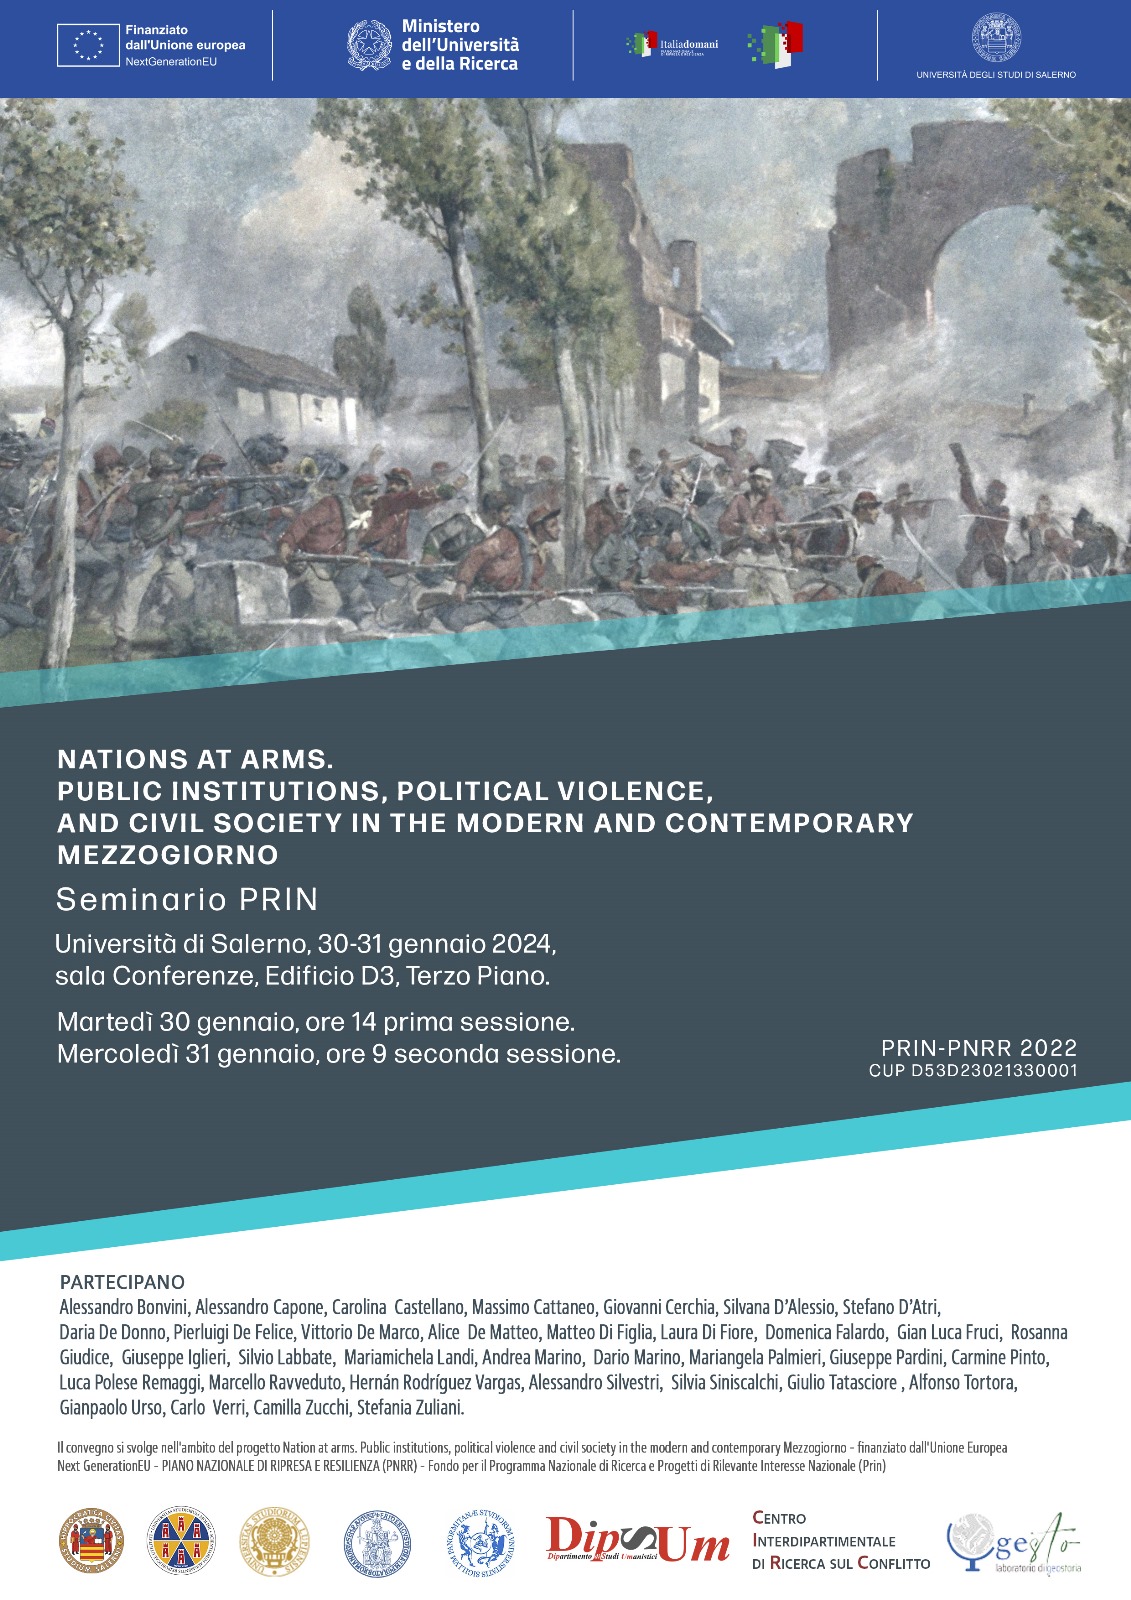 Nations at Arms. Public Institutions, Political Violence and Civil Society in the Modern and Contemporary Mezzogiorno